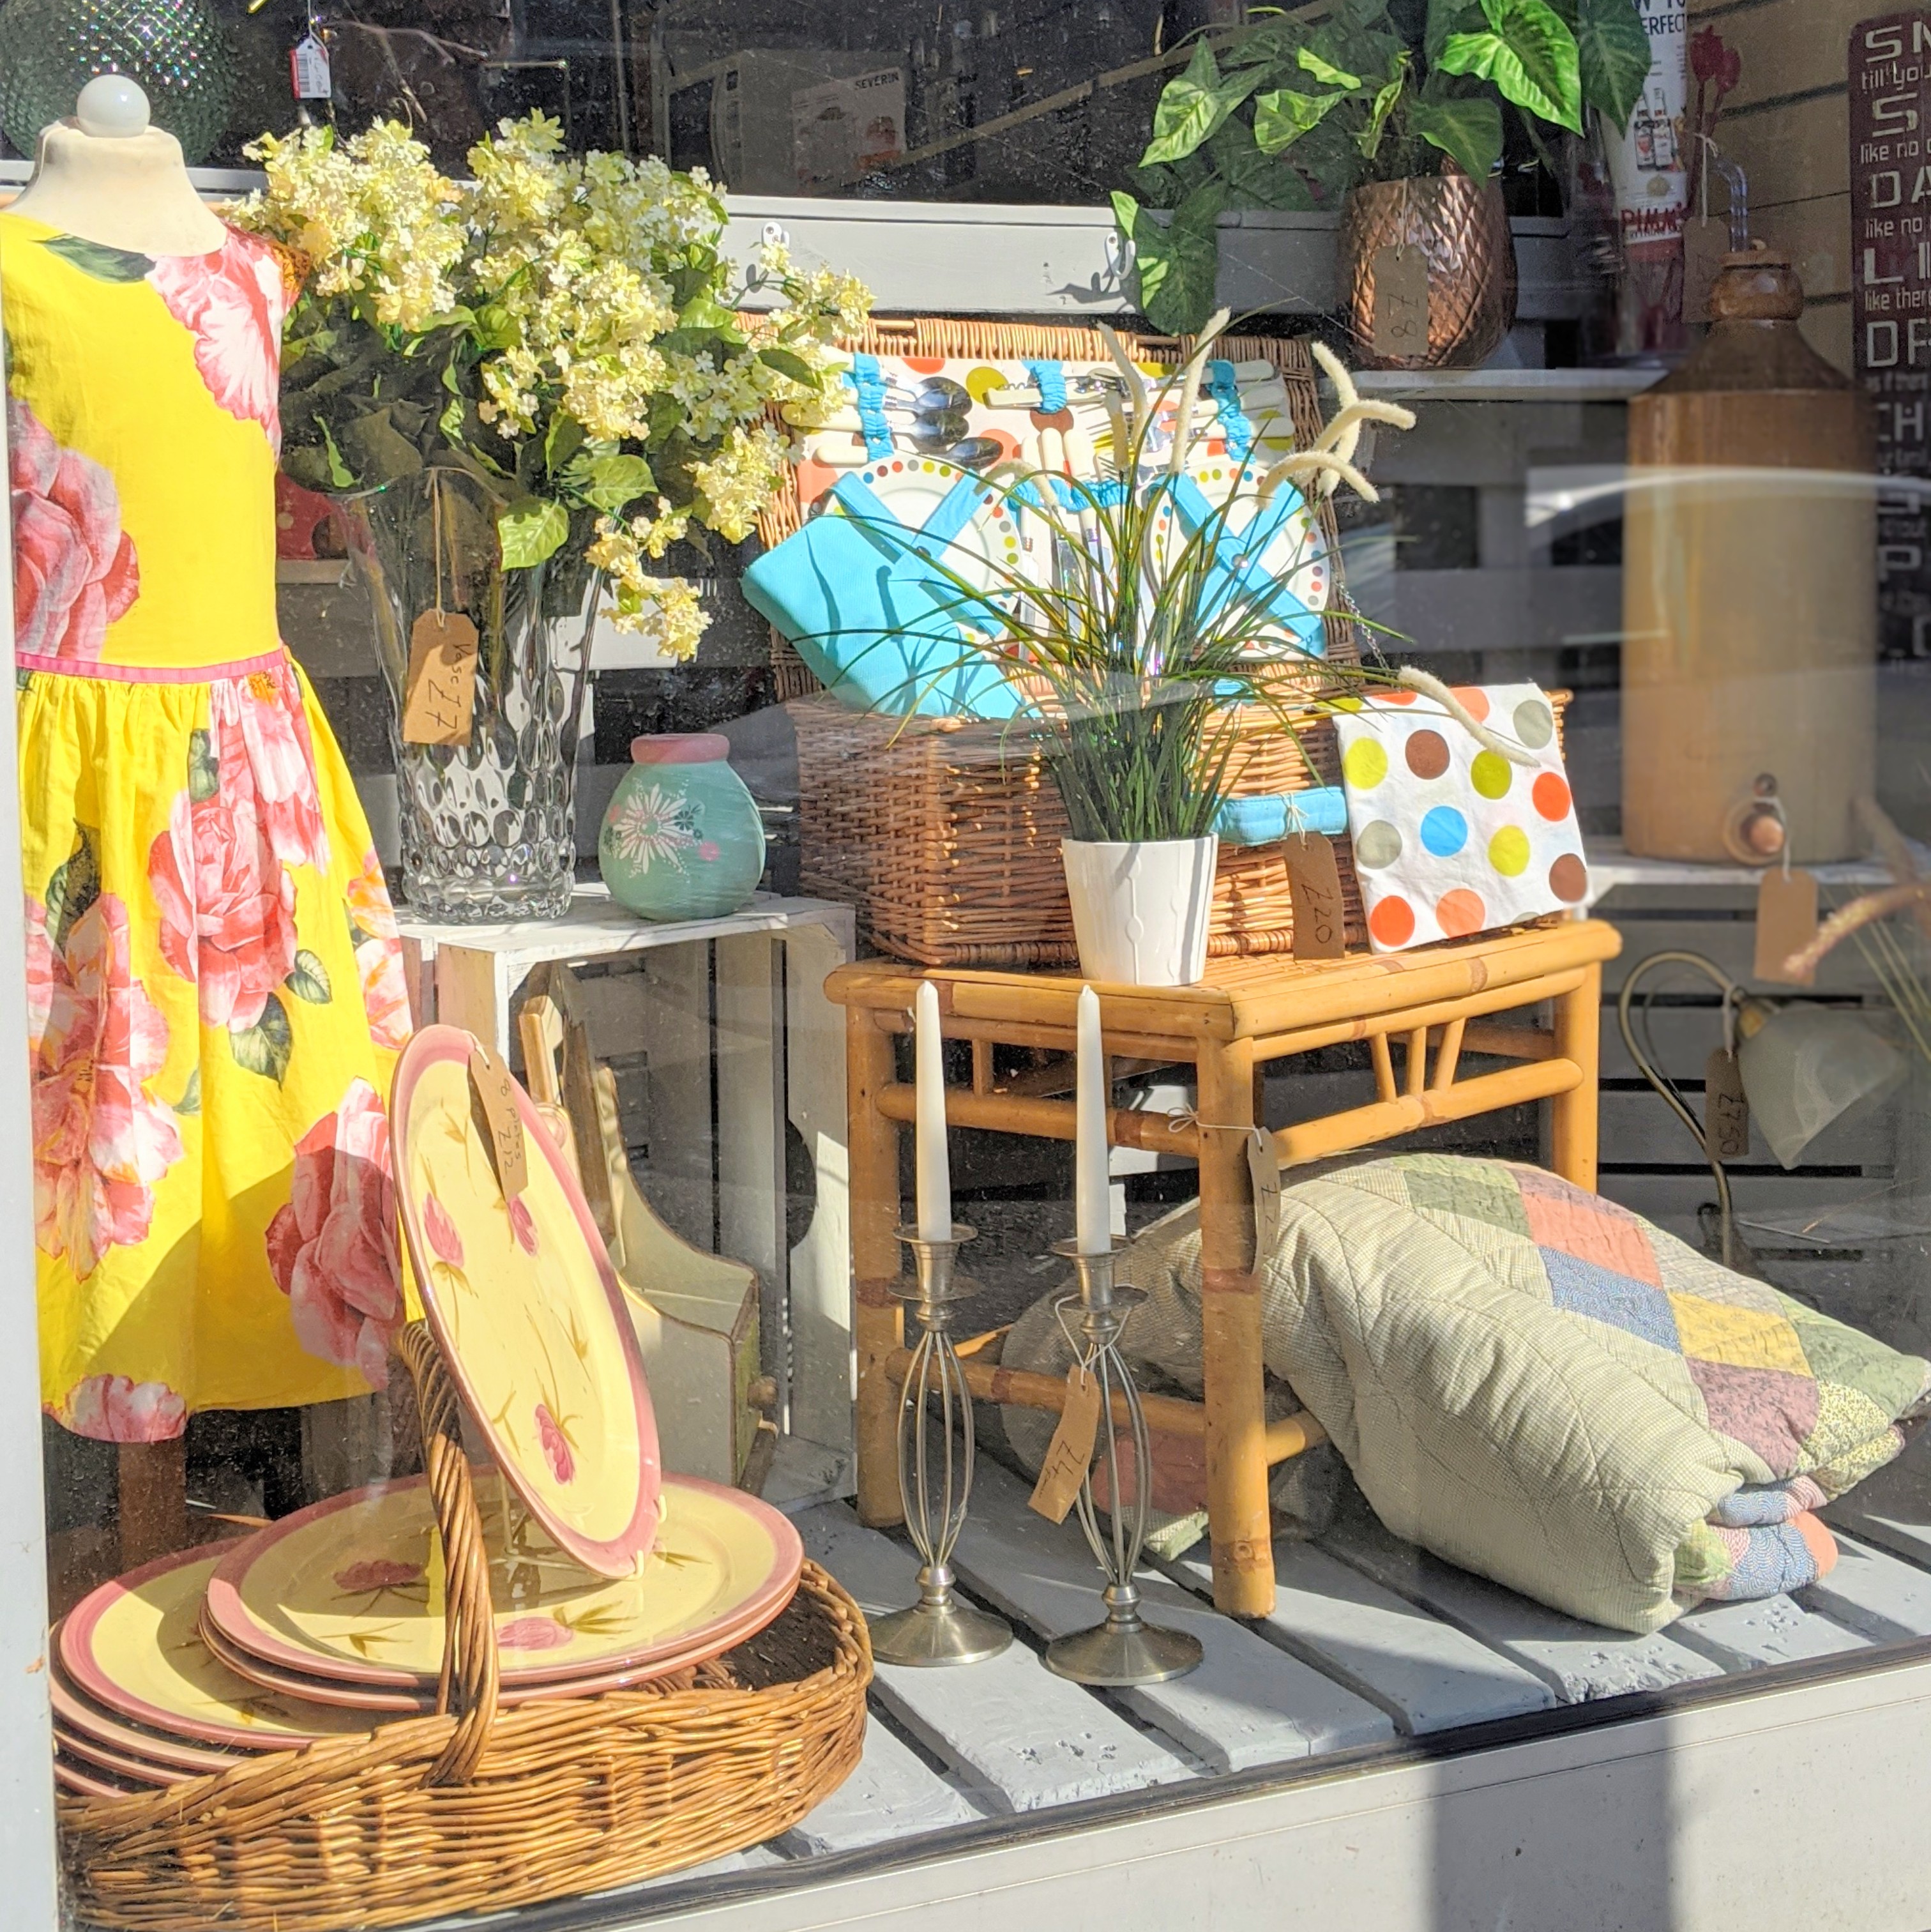 A window display with a yellow dress and flowers.